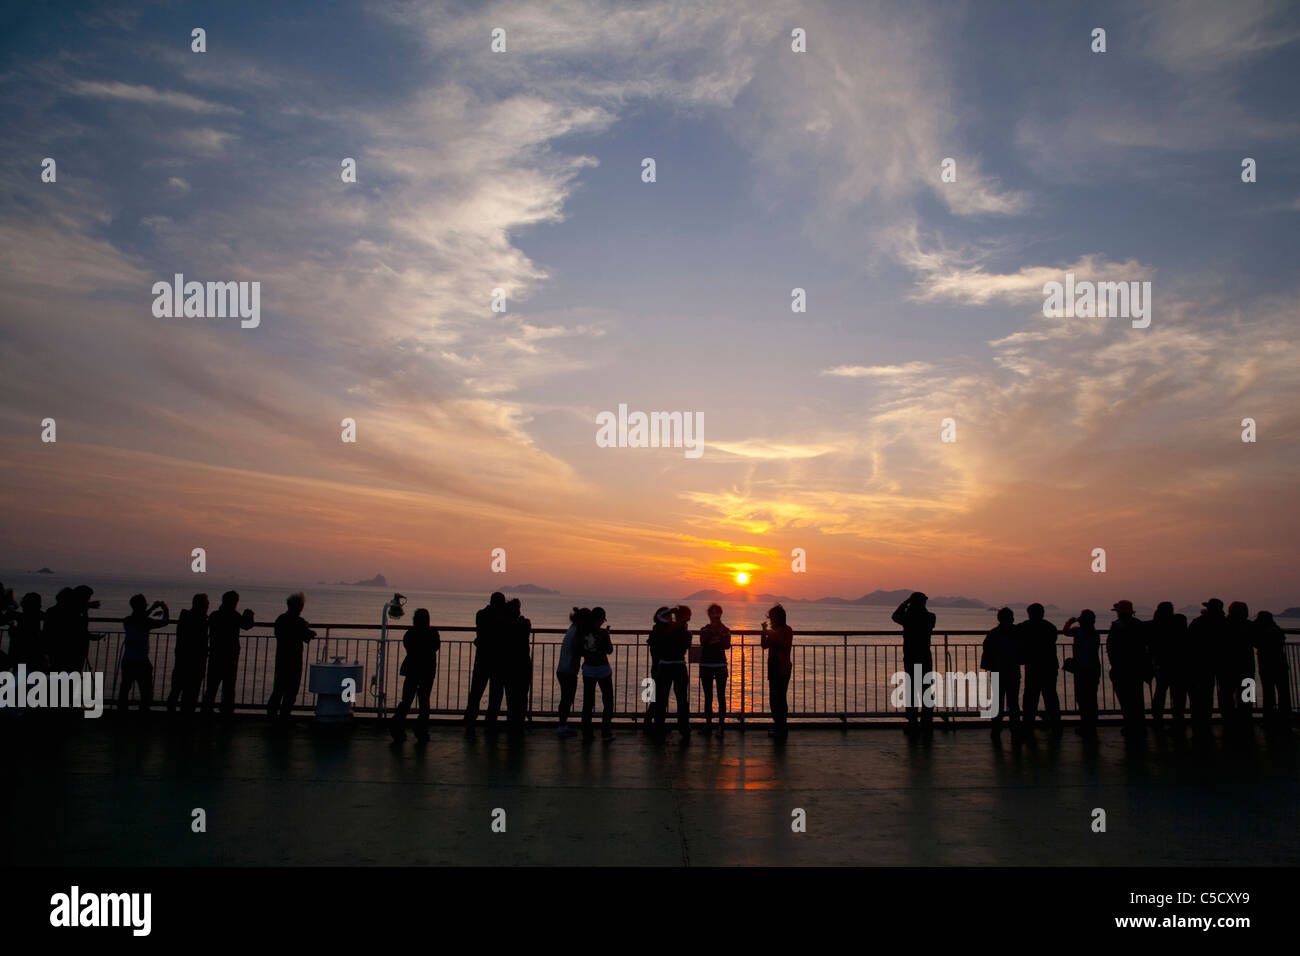 silhouette of the people standing by the beach Stock Photo